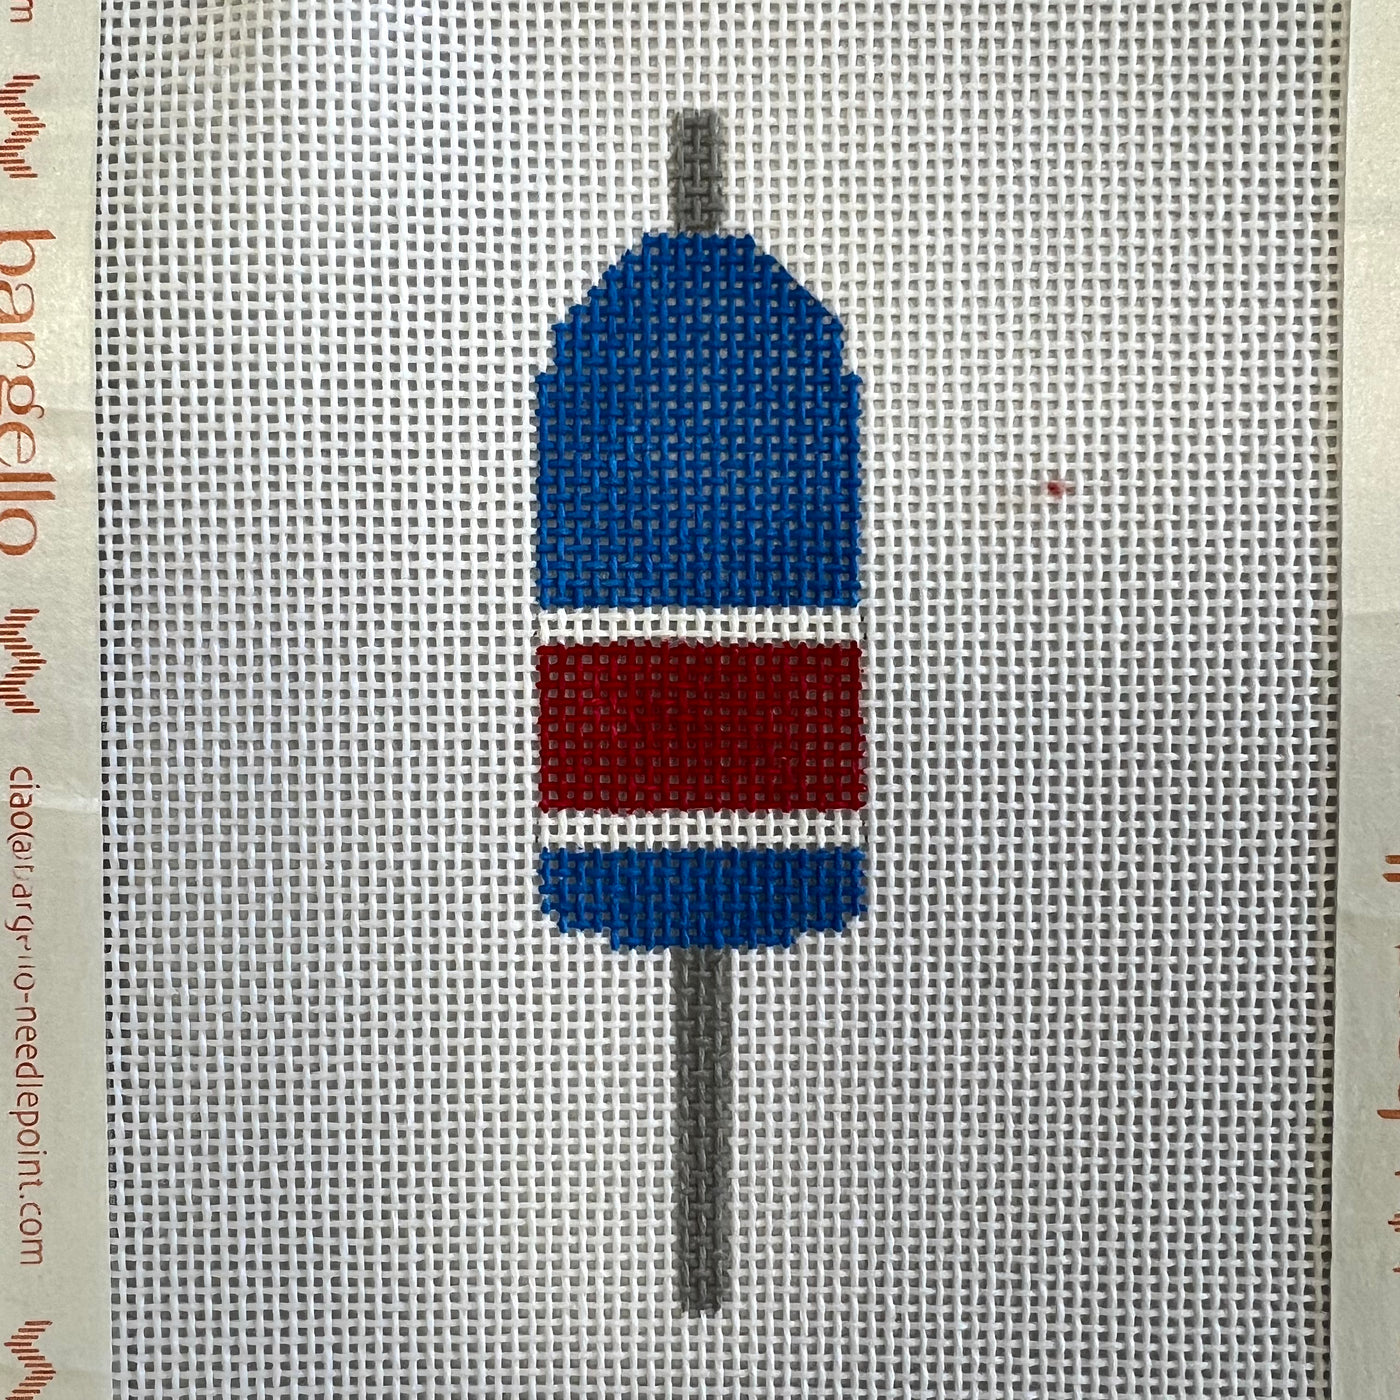 Bright Blue Red Buoy ornament needlepoint canvas